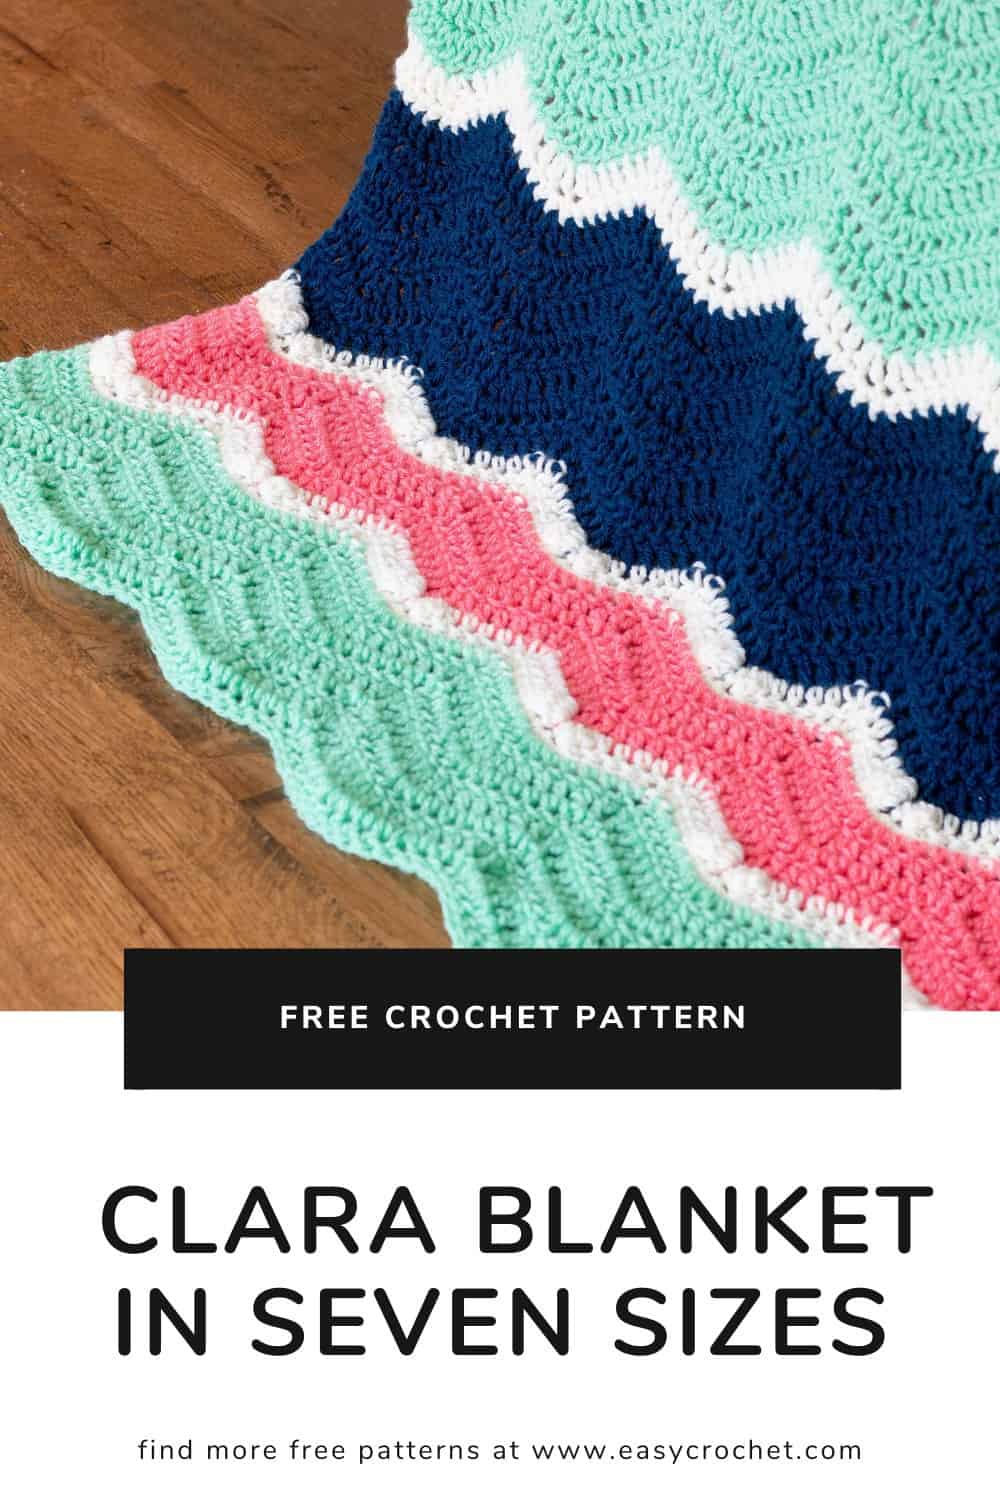 Make this crochet blanket pattern using the double crochet stitch! Free pattern from easycrochet.com. Find this design and many more. #crochetblanket #easycrochet #freecrochetpattern via @easycrochetcom